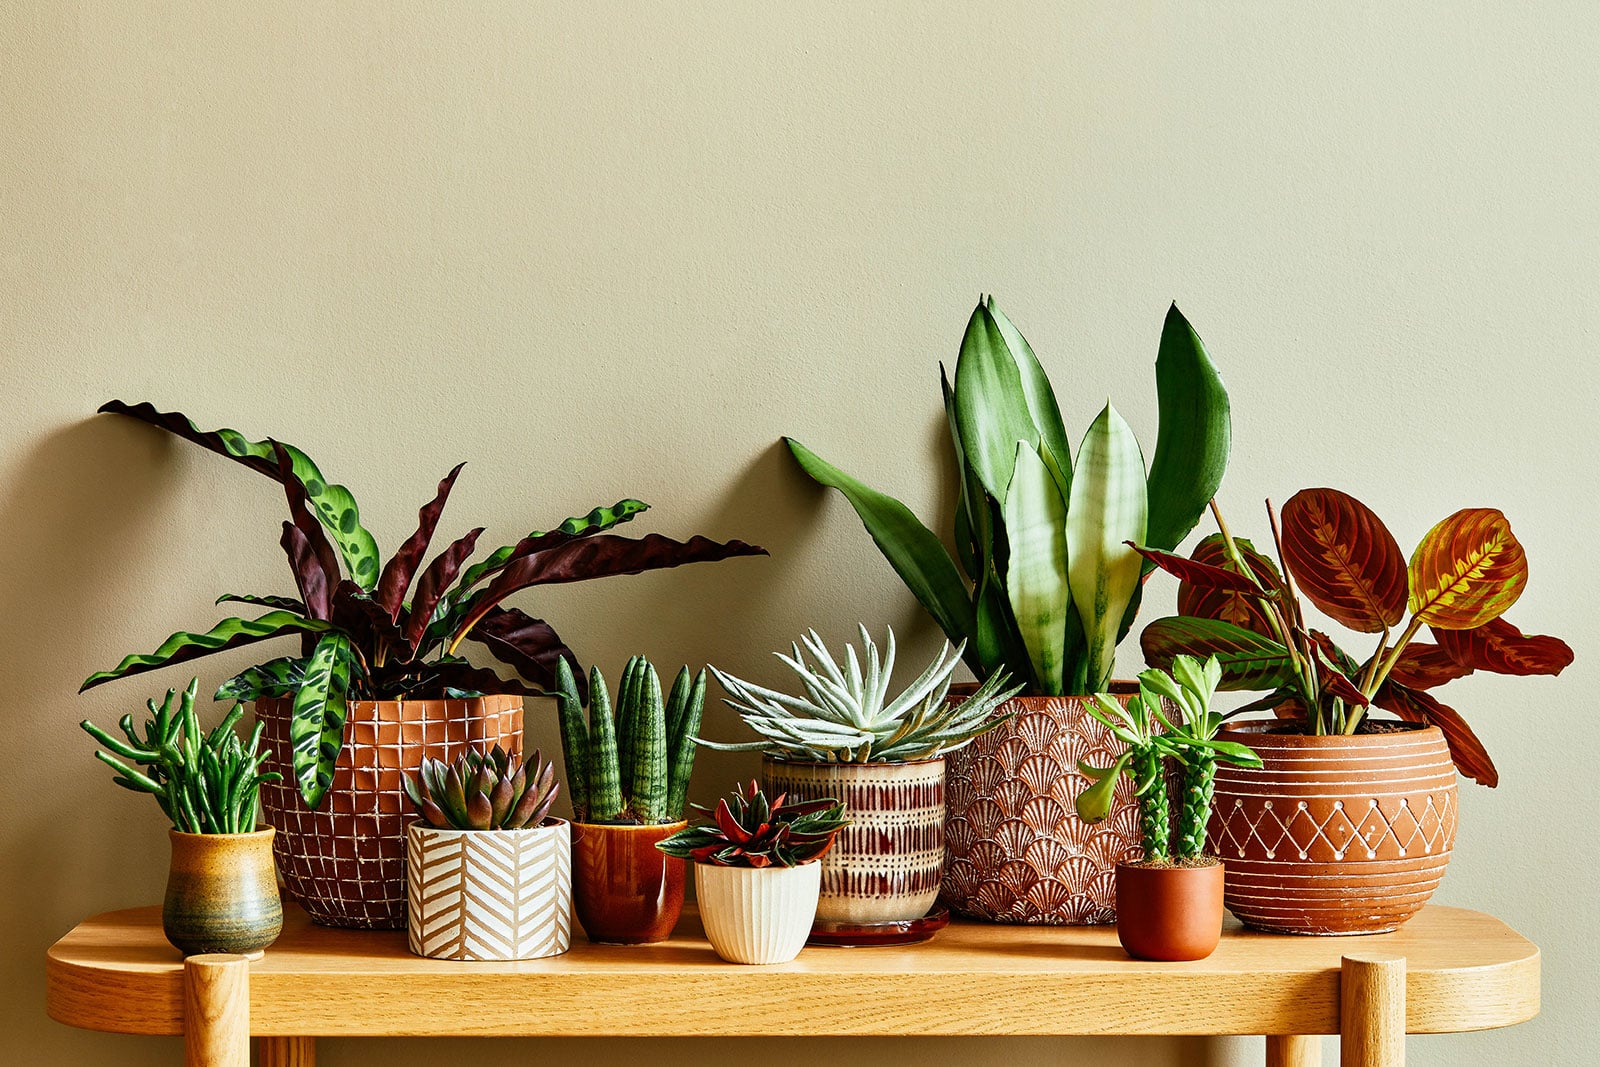 An assortment of houseplants in neutral decorative pottery displayed on a wooden console